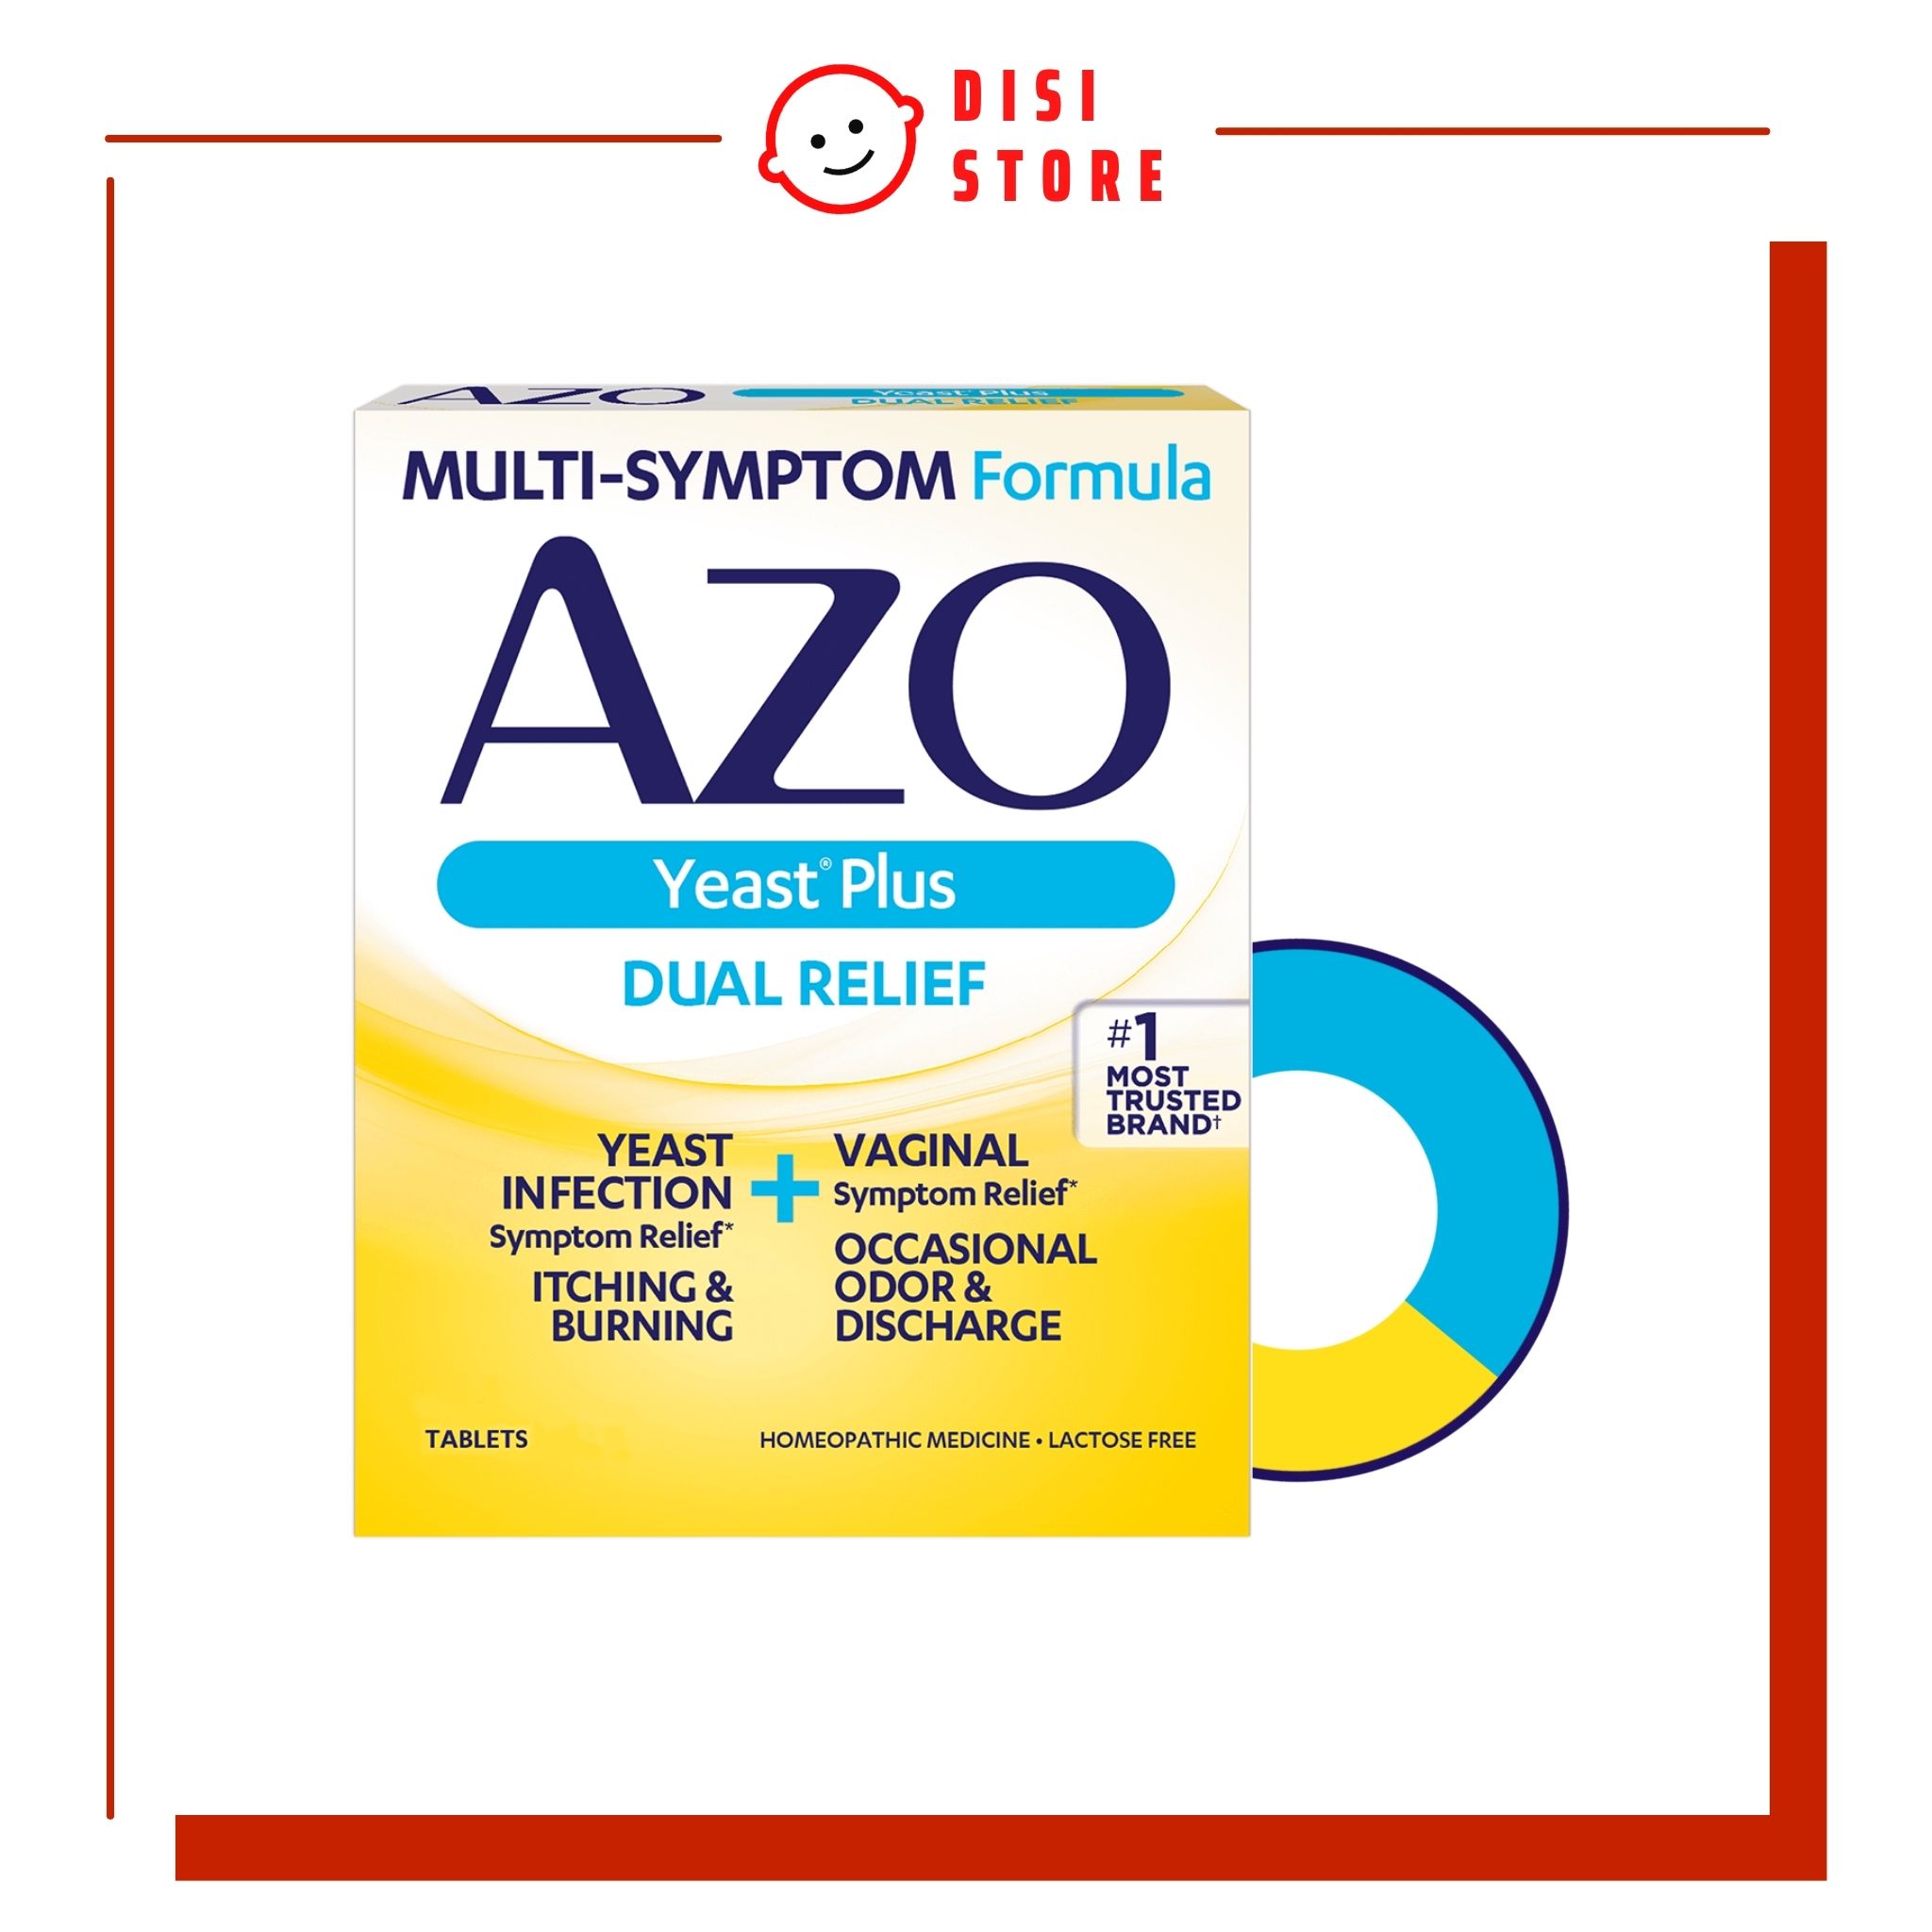 Azo yeast plus gold 60 tablets support itch, blood White for women-Disi